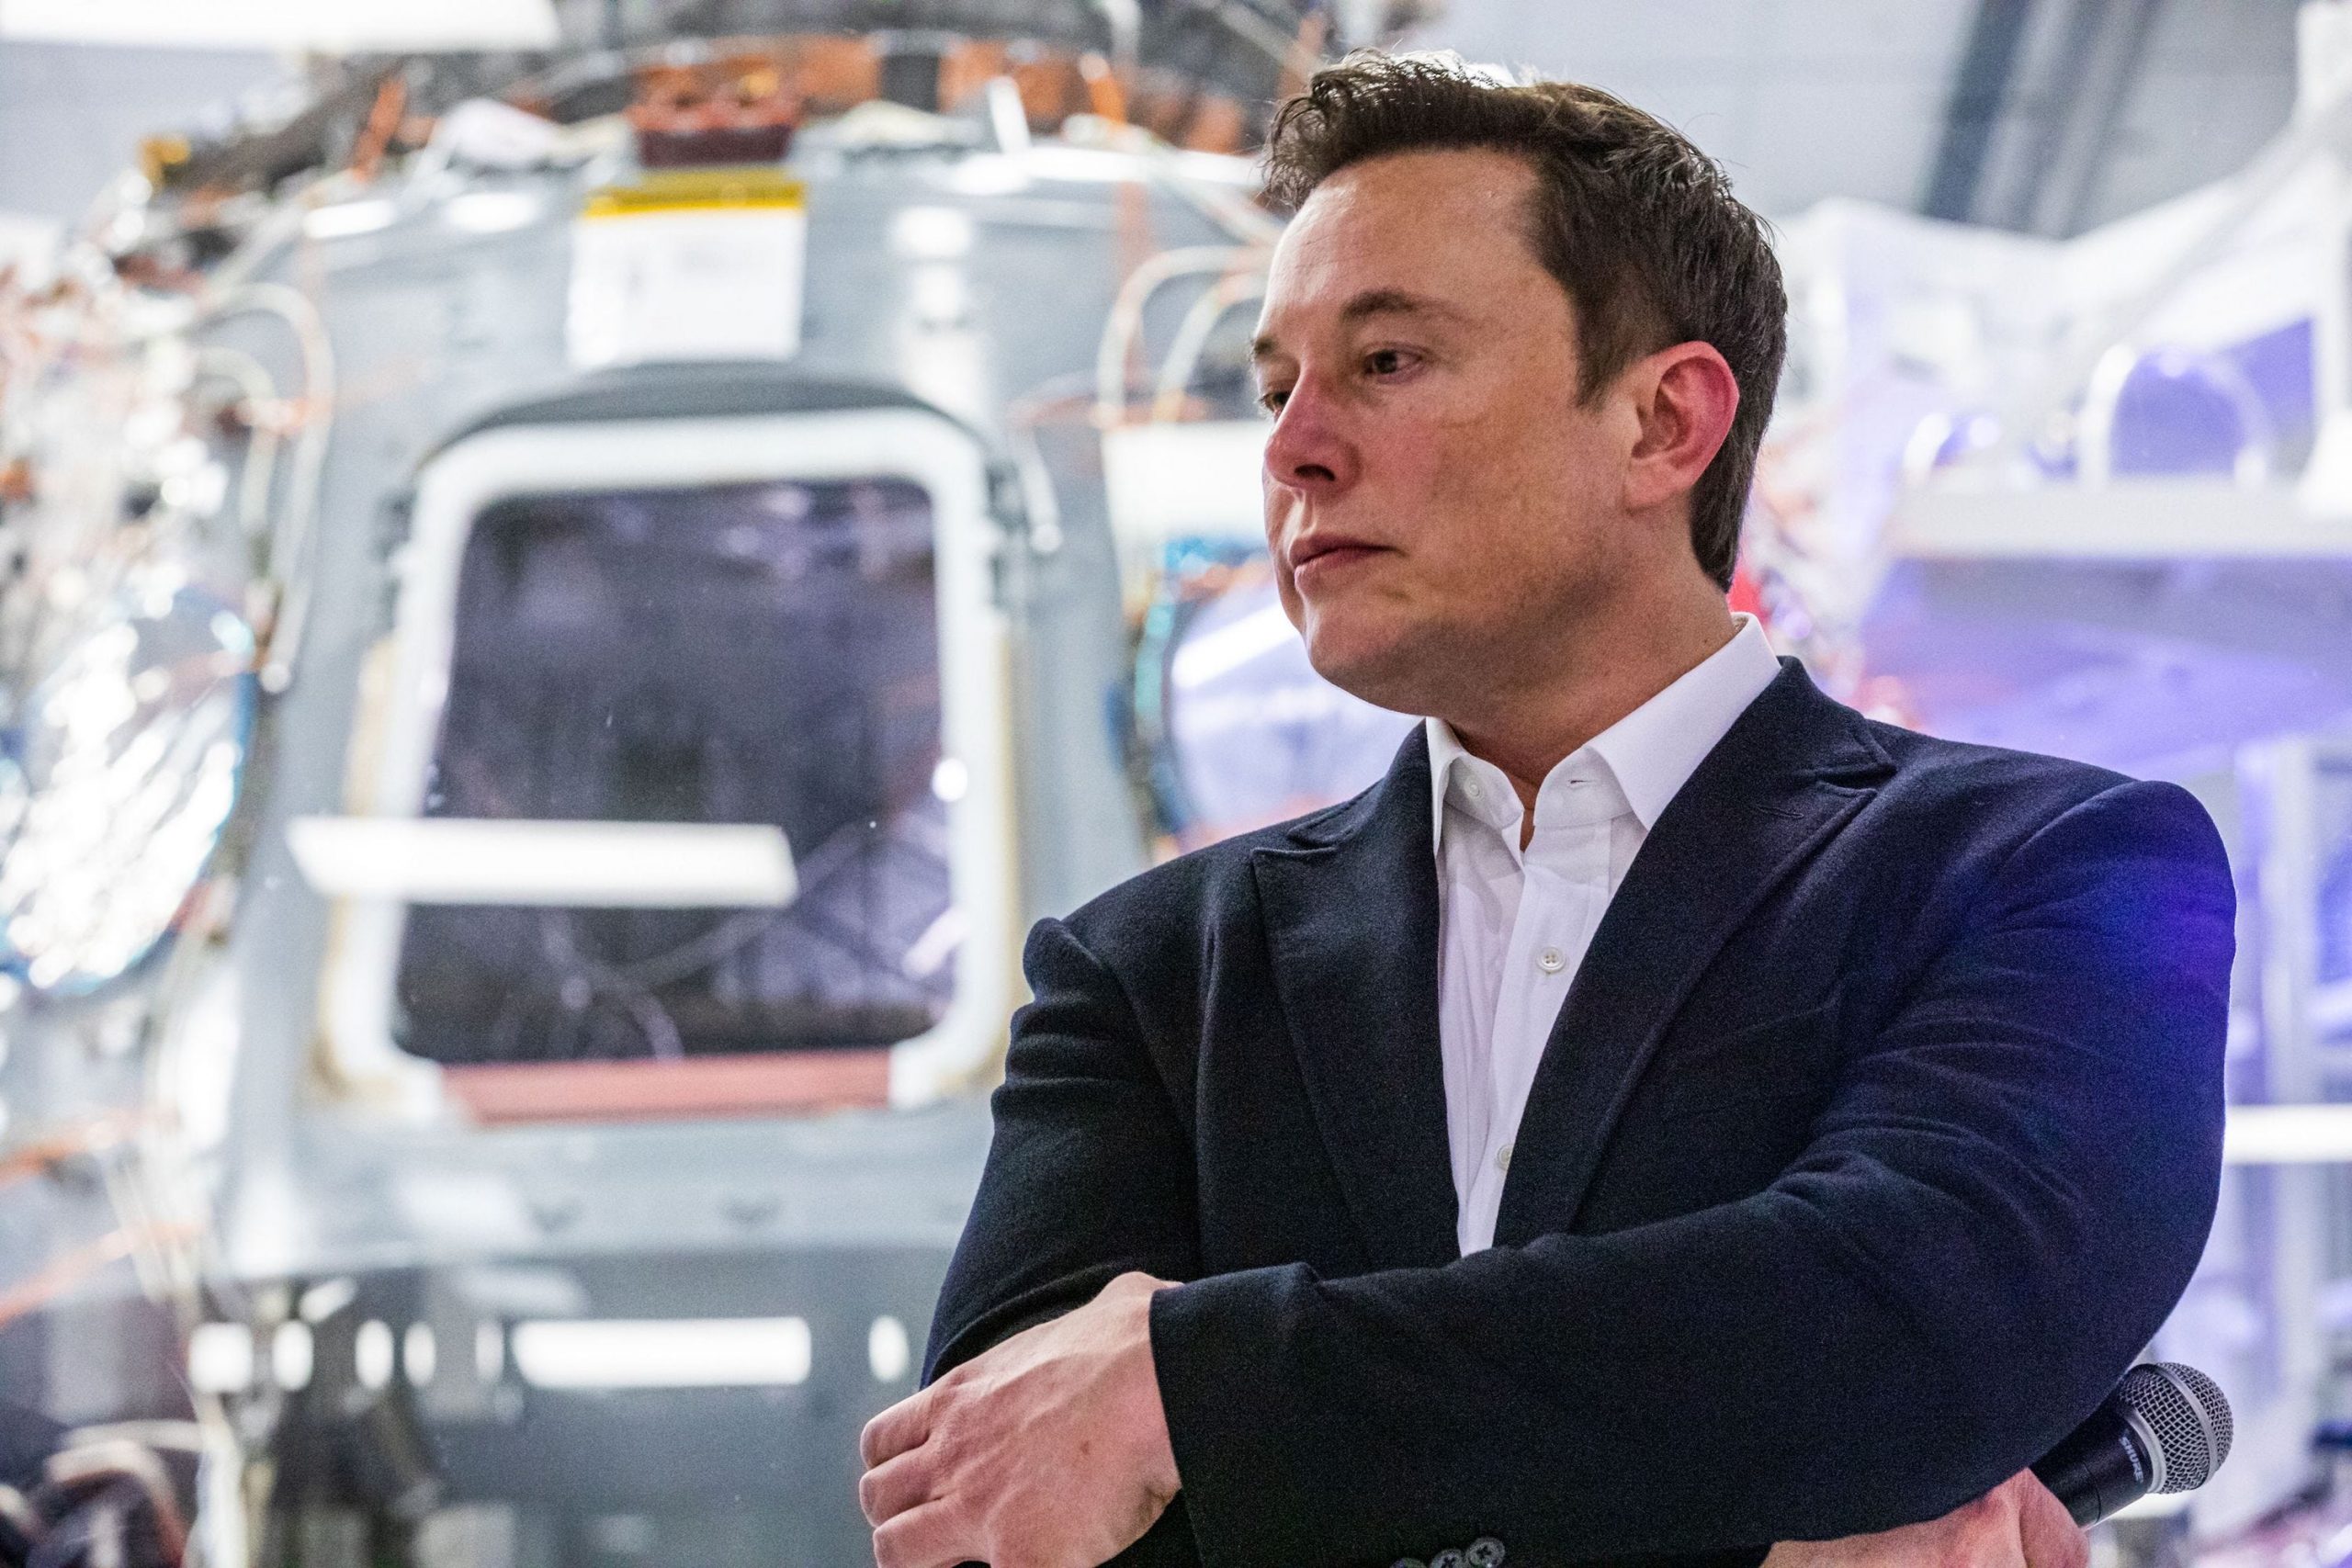 SpaceX founder Elon Musk addresses members of the media during a press conference announcing new developments of the Crew Dragon reusable spacecraft, at SpaceX headquarters in Hawthorne, California on October 10, 2019.